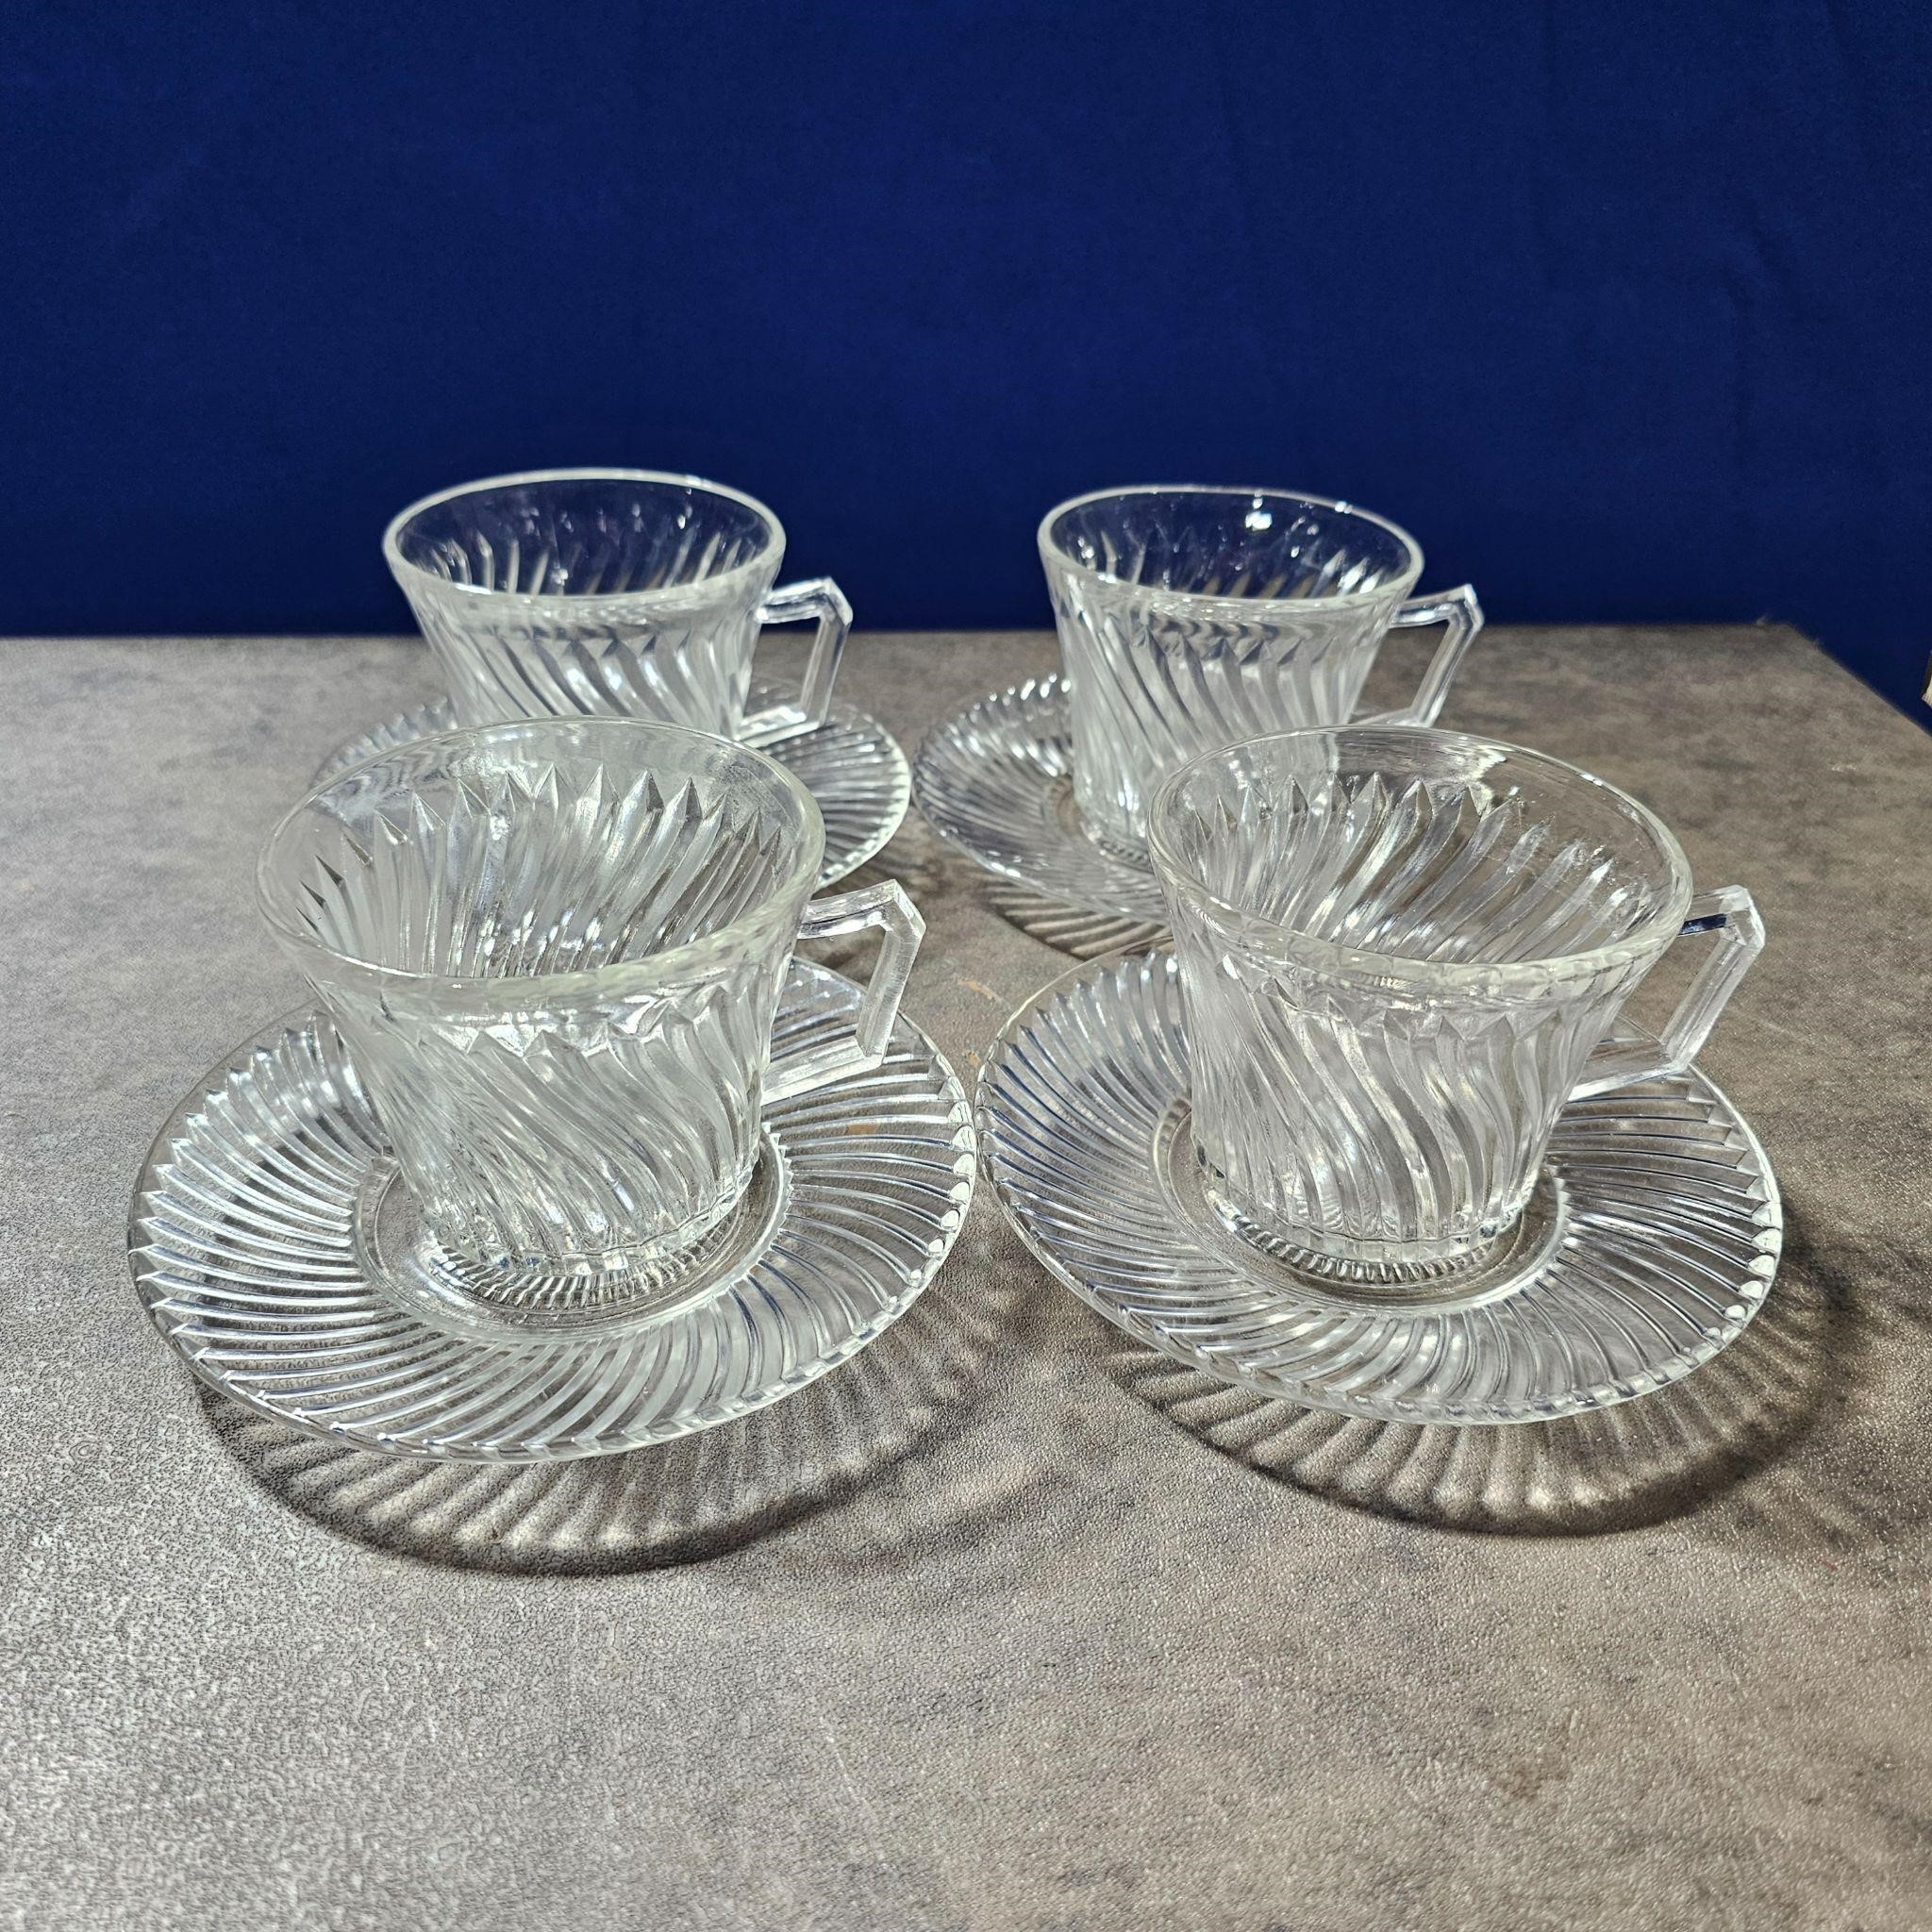 High-End Glass Online Auction (6)